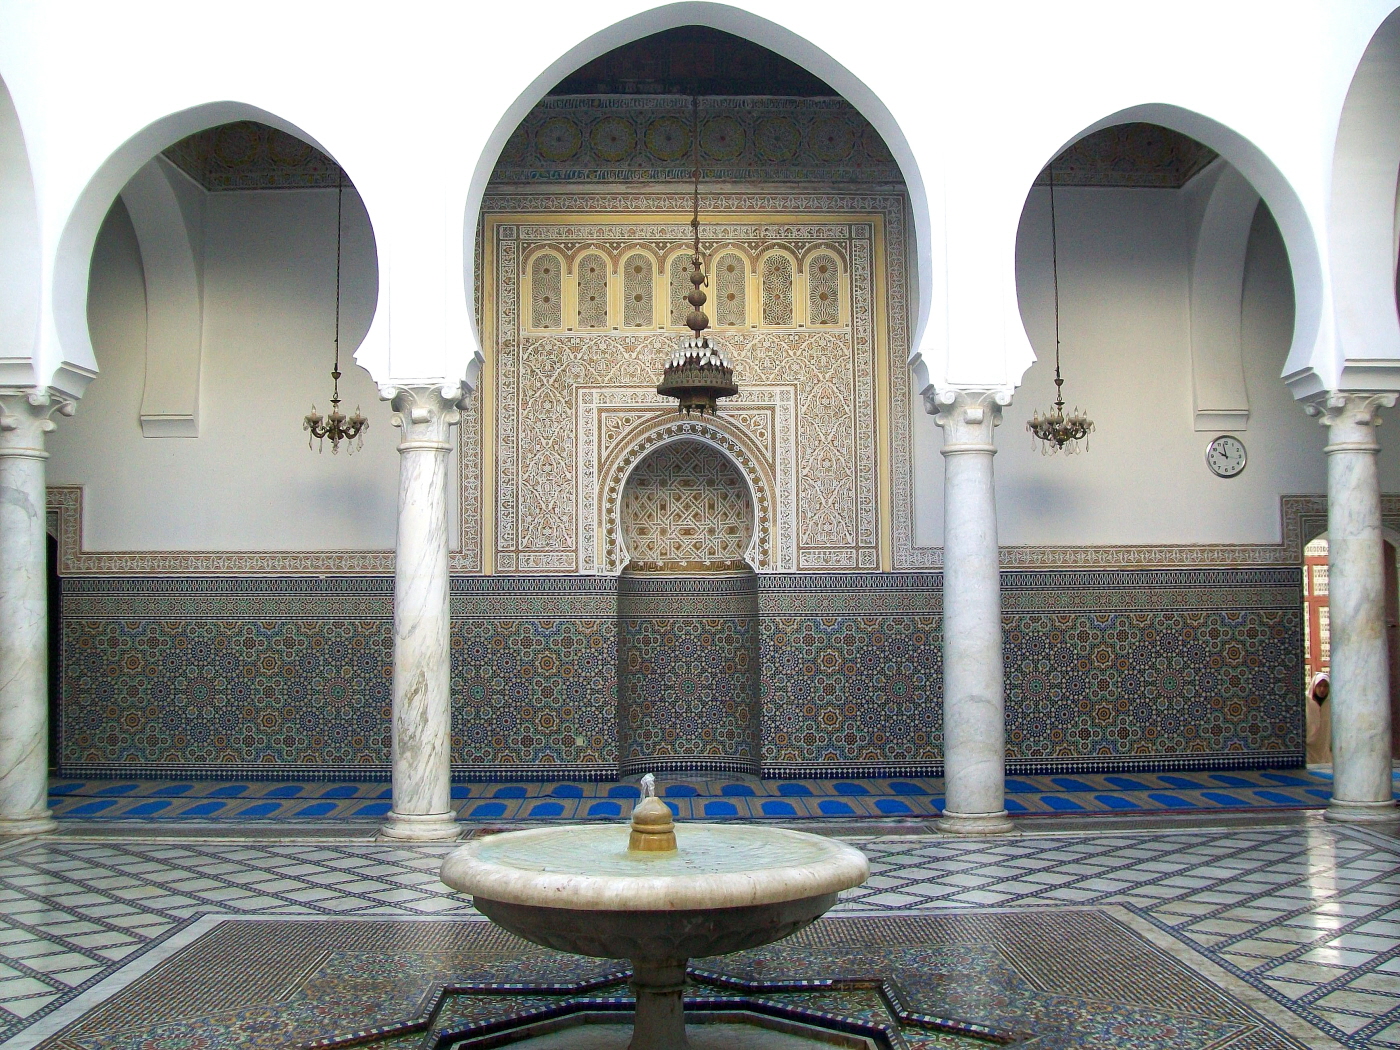 Moulay Idriss Mosque ( Idris ibn Abdillah -the Great, Great Grandson of the Holy Prophet)